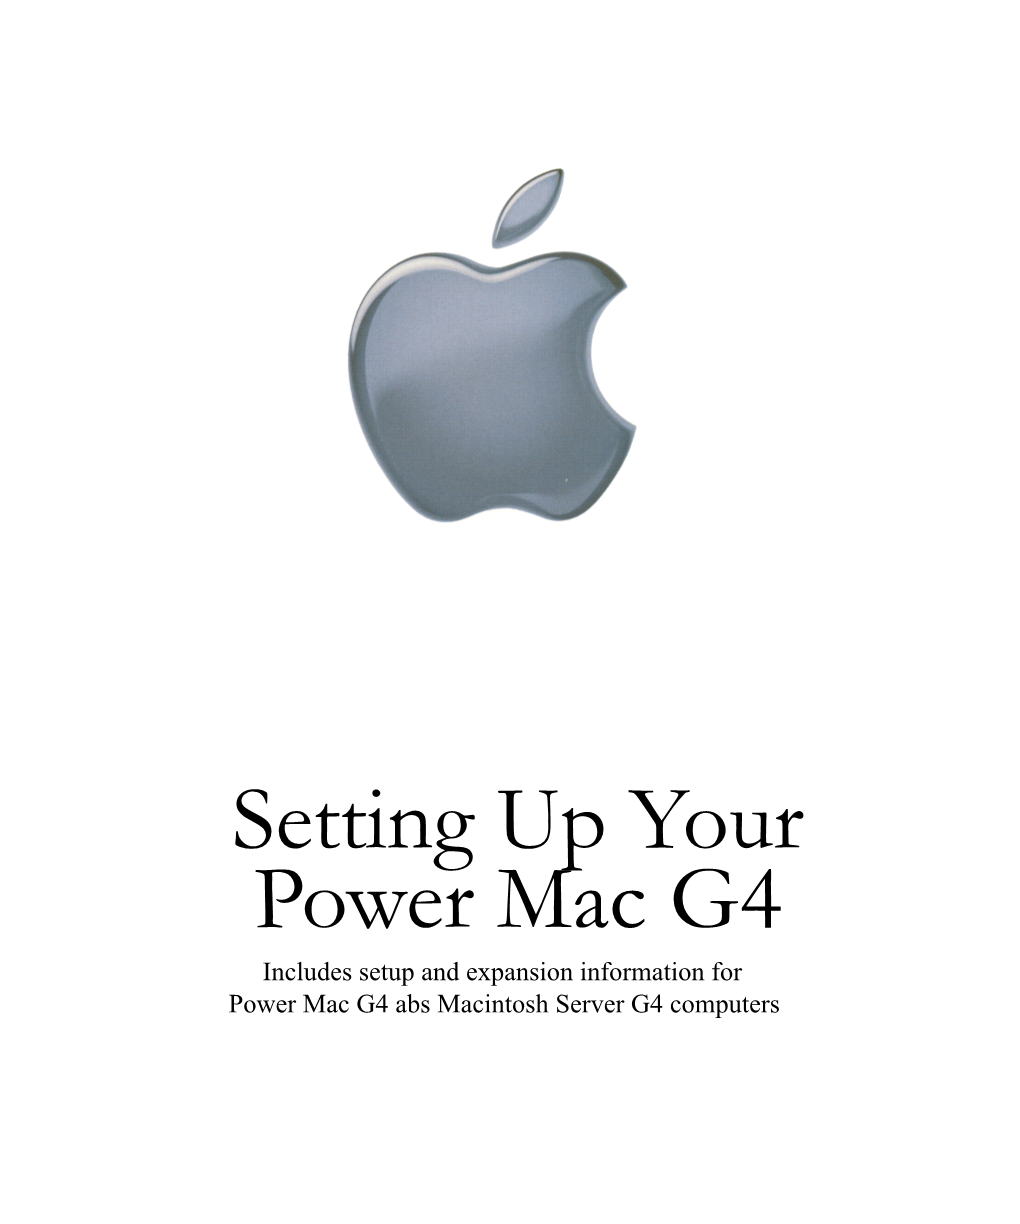 Setting up Your Power Mac G4 Includes Setup and Expansion Information for Power Mac G4 Abs Macintosh Server G4 Computers